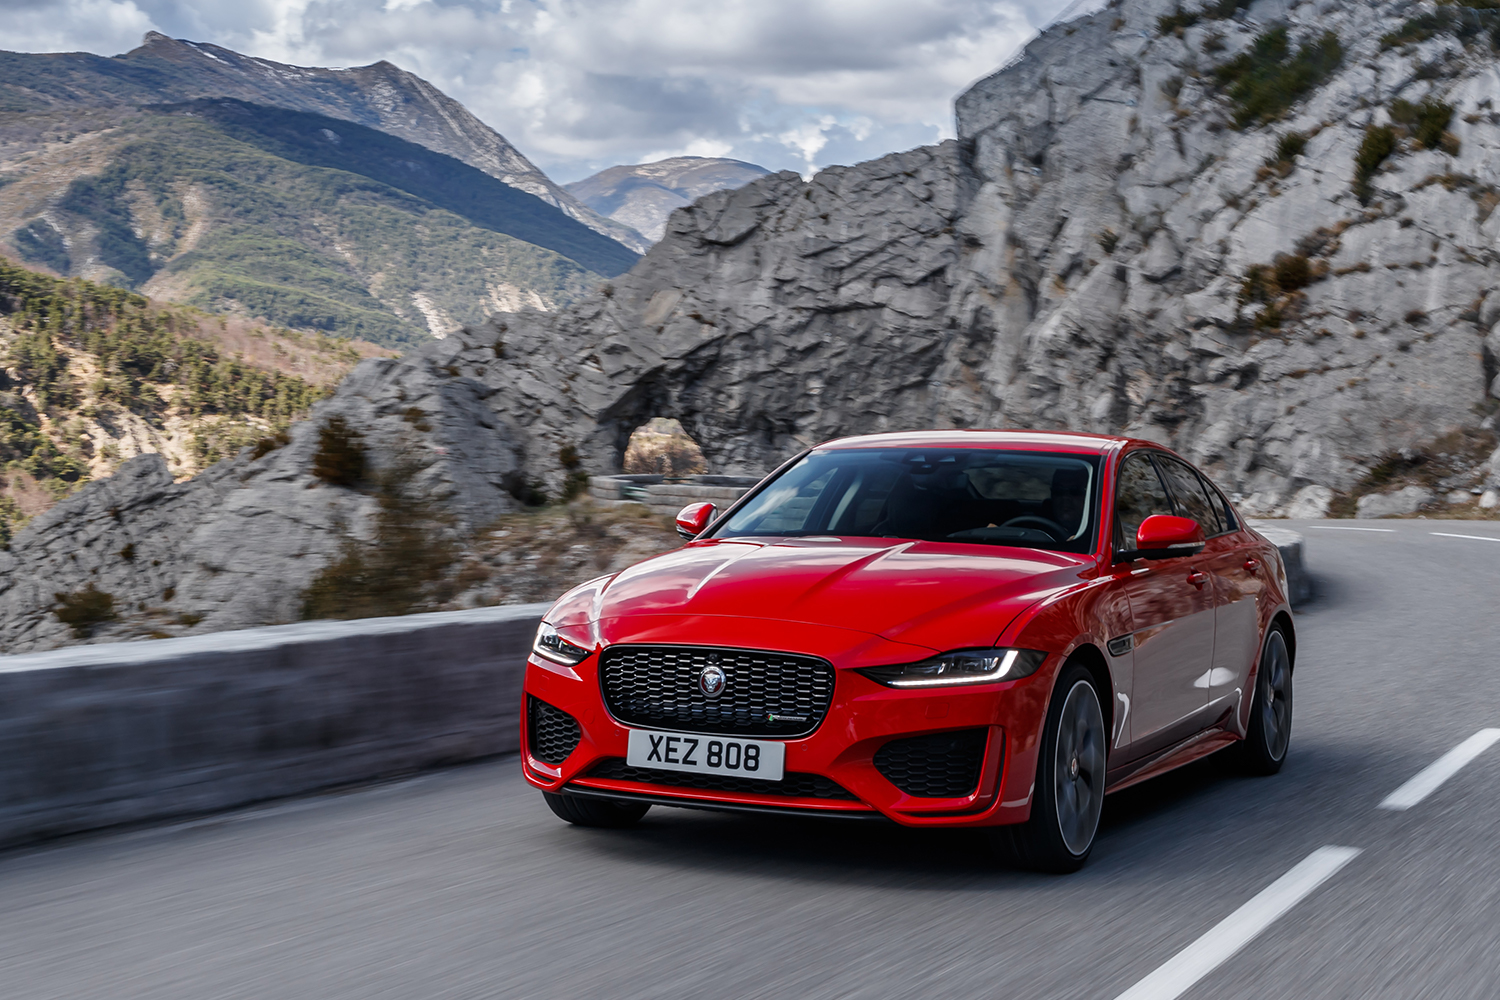 A red Jaguar XE driving on the right side of the road through the mountains